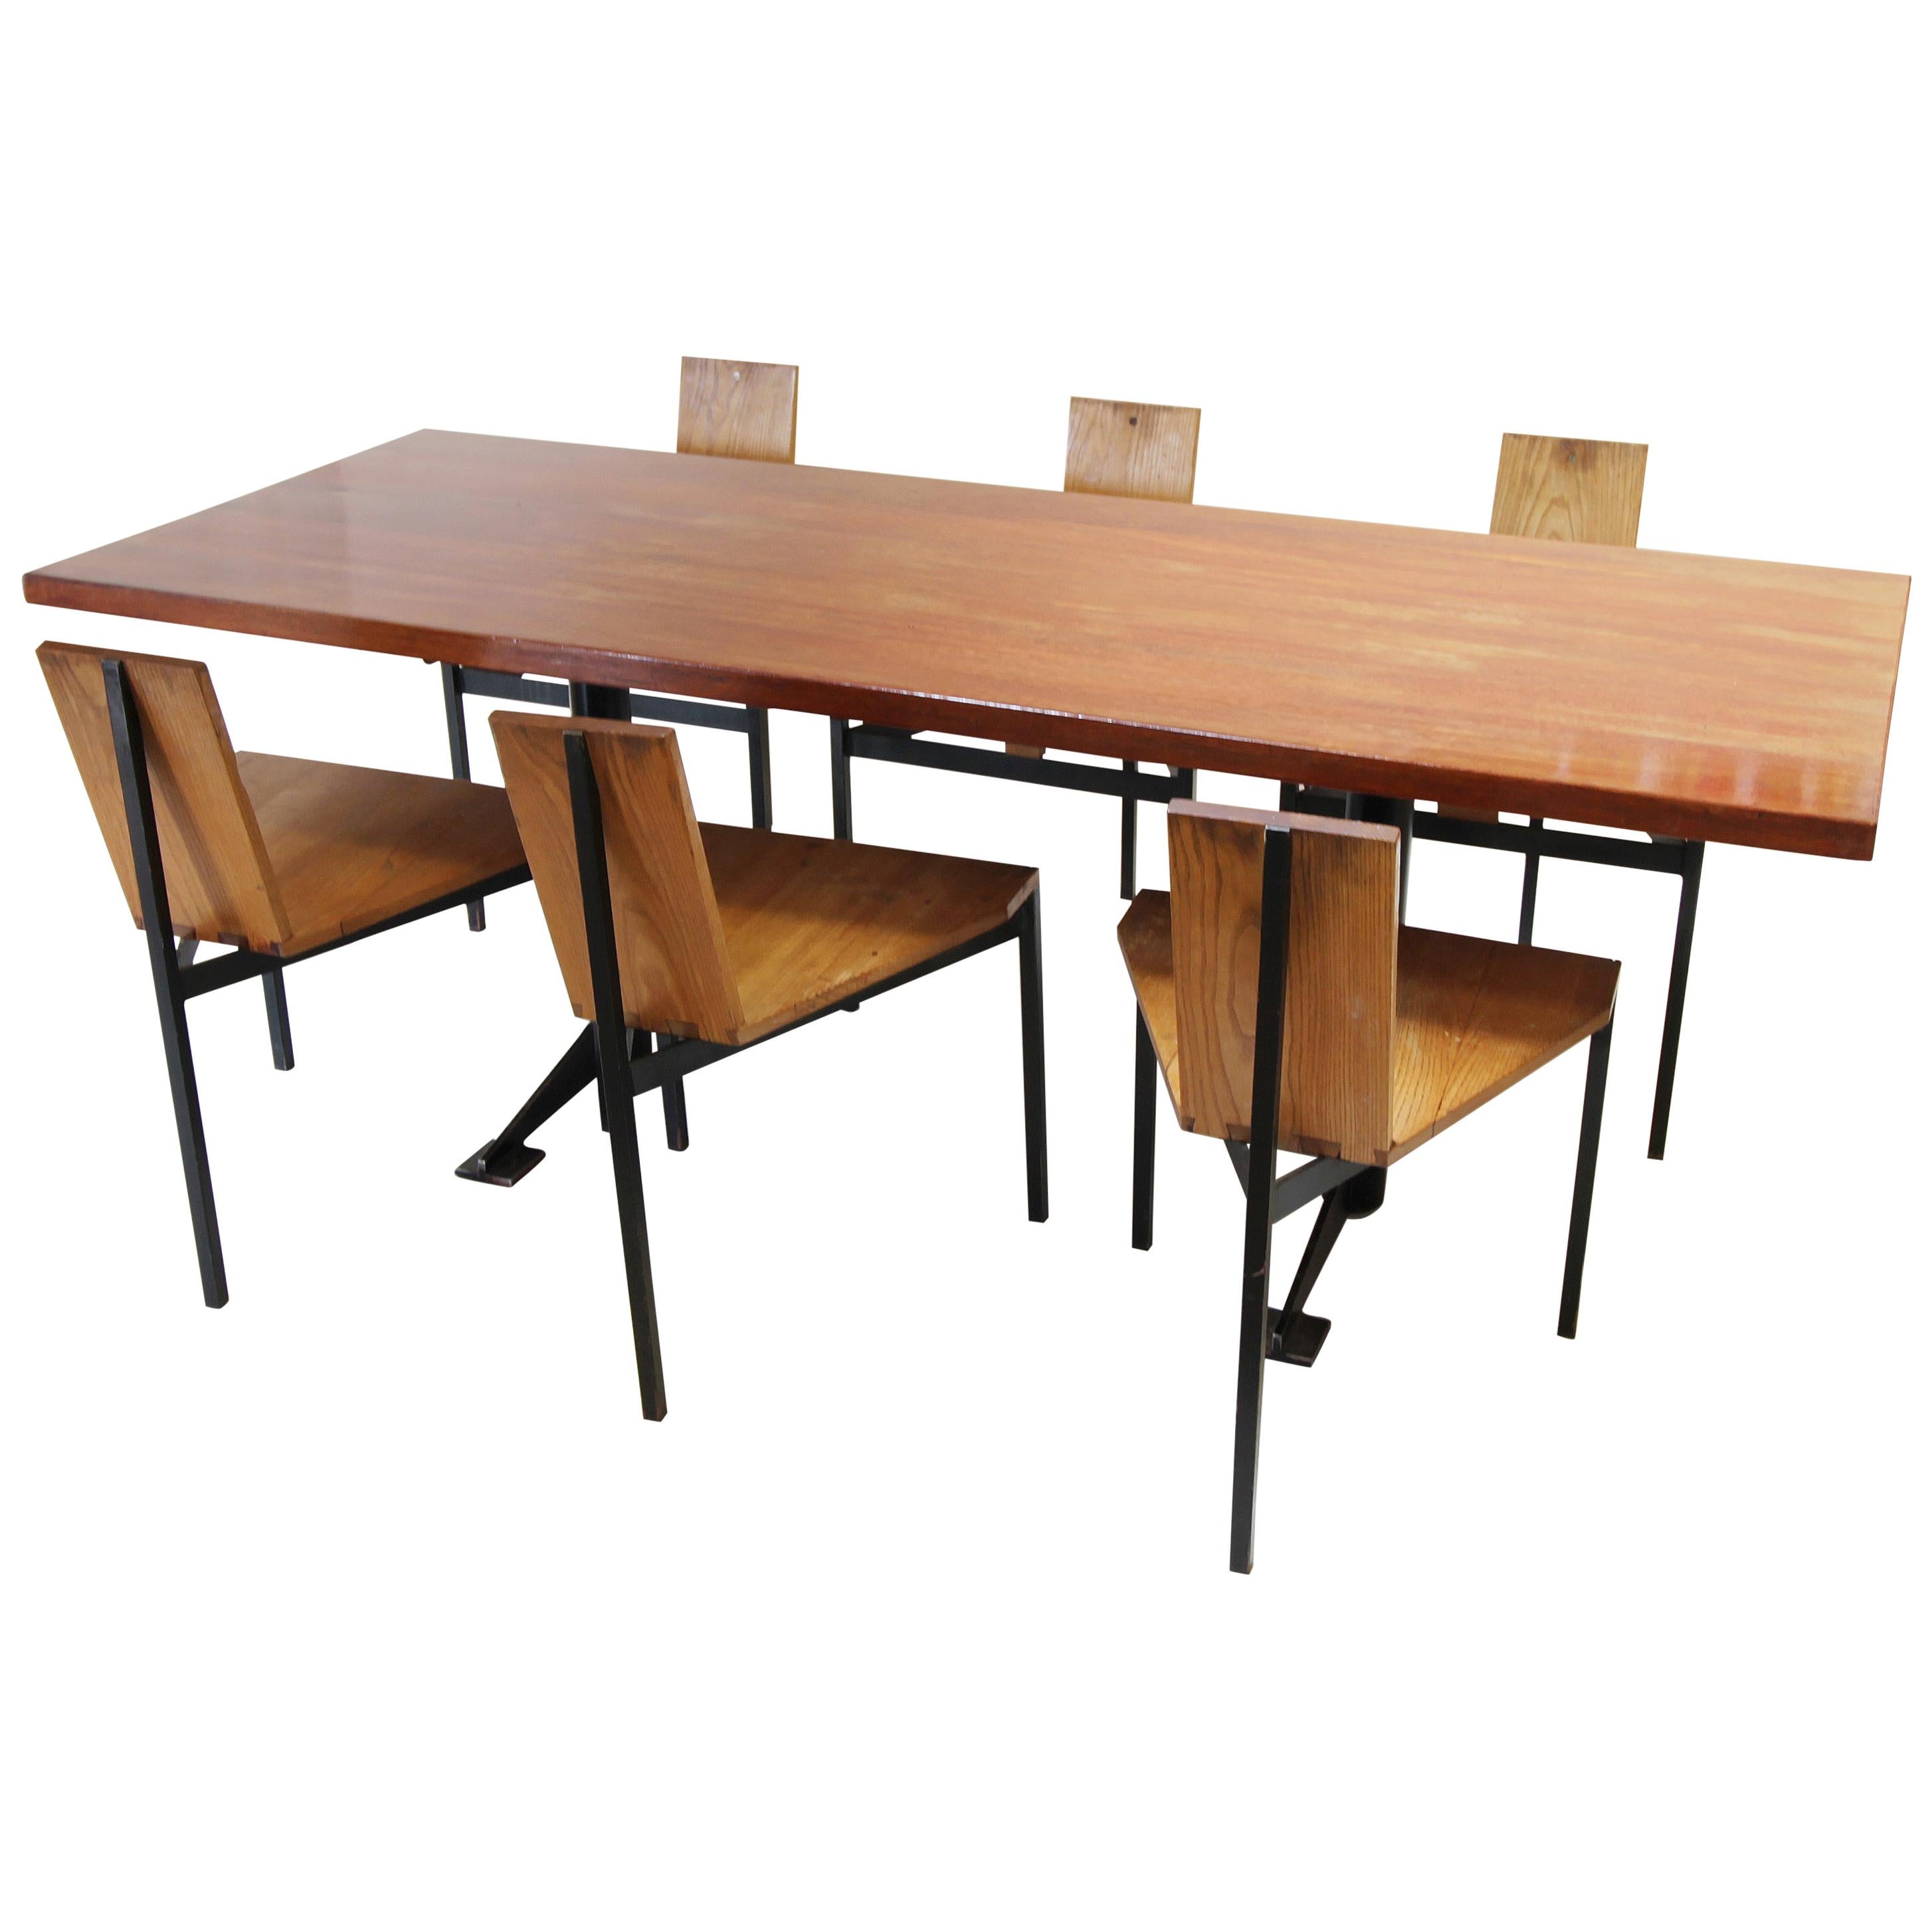 Dining Table and Six '6' Chairs by Wim Den Boon, Netherlands 1958 For Sale